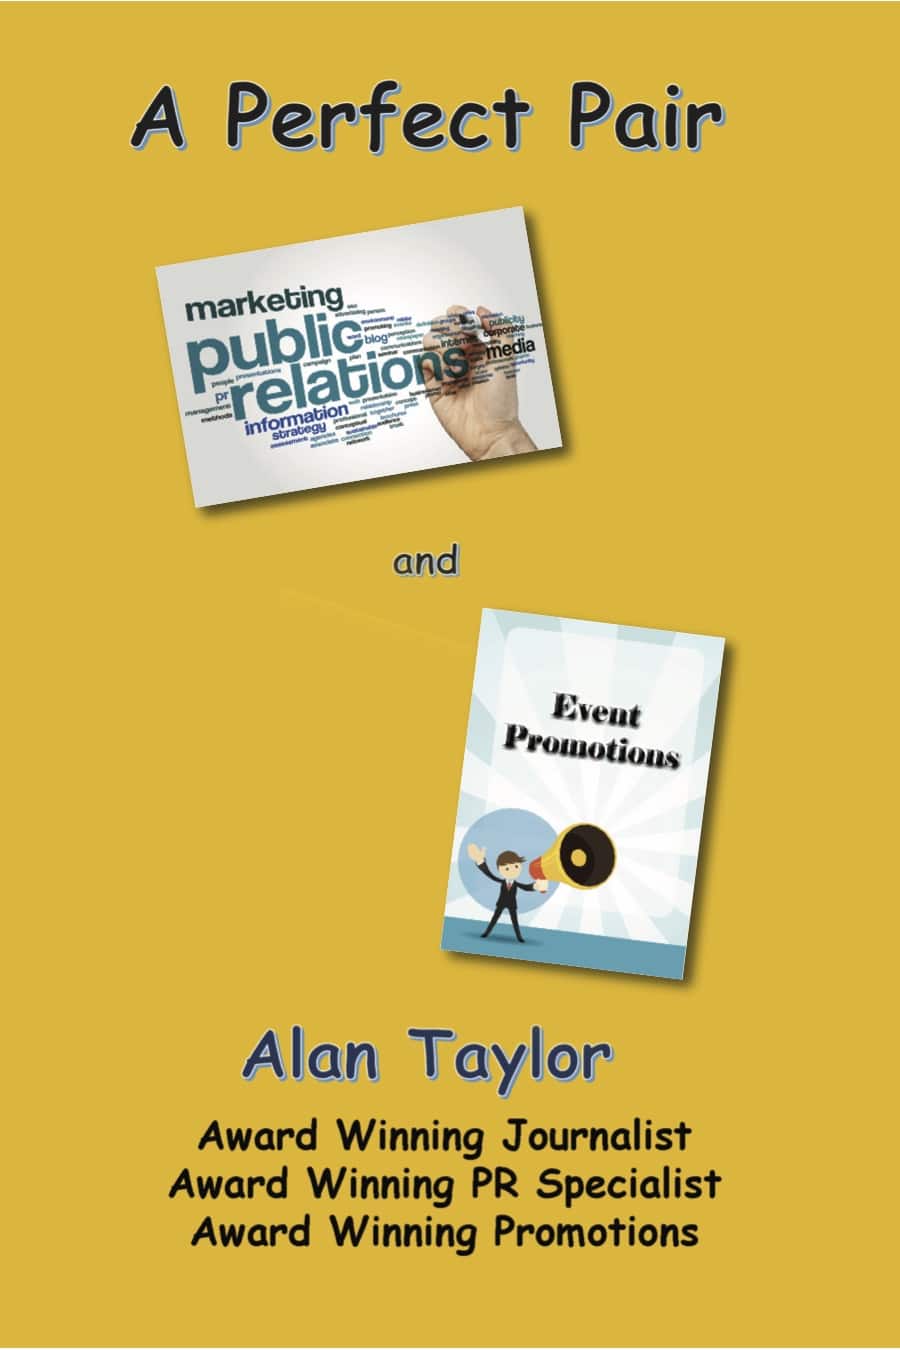 PR Vet Alan Taylor Chronicles Career in New Book, “A Perfect Pair: PR and Event Promotions”